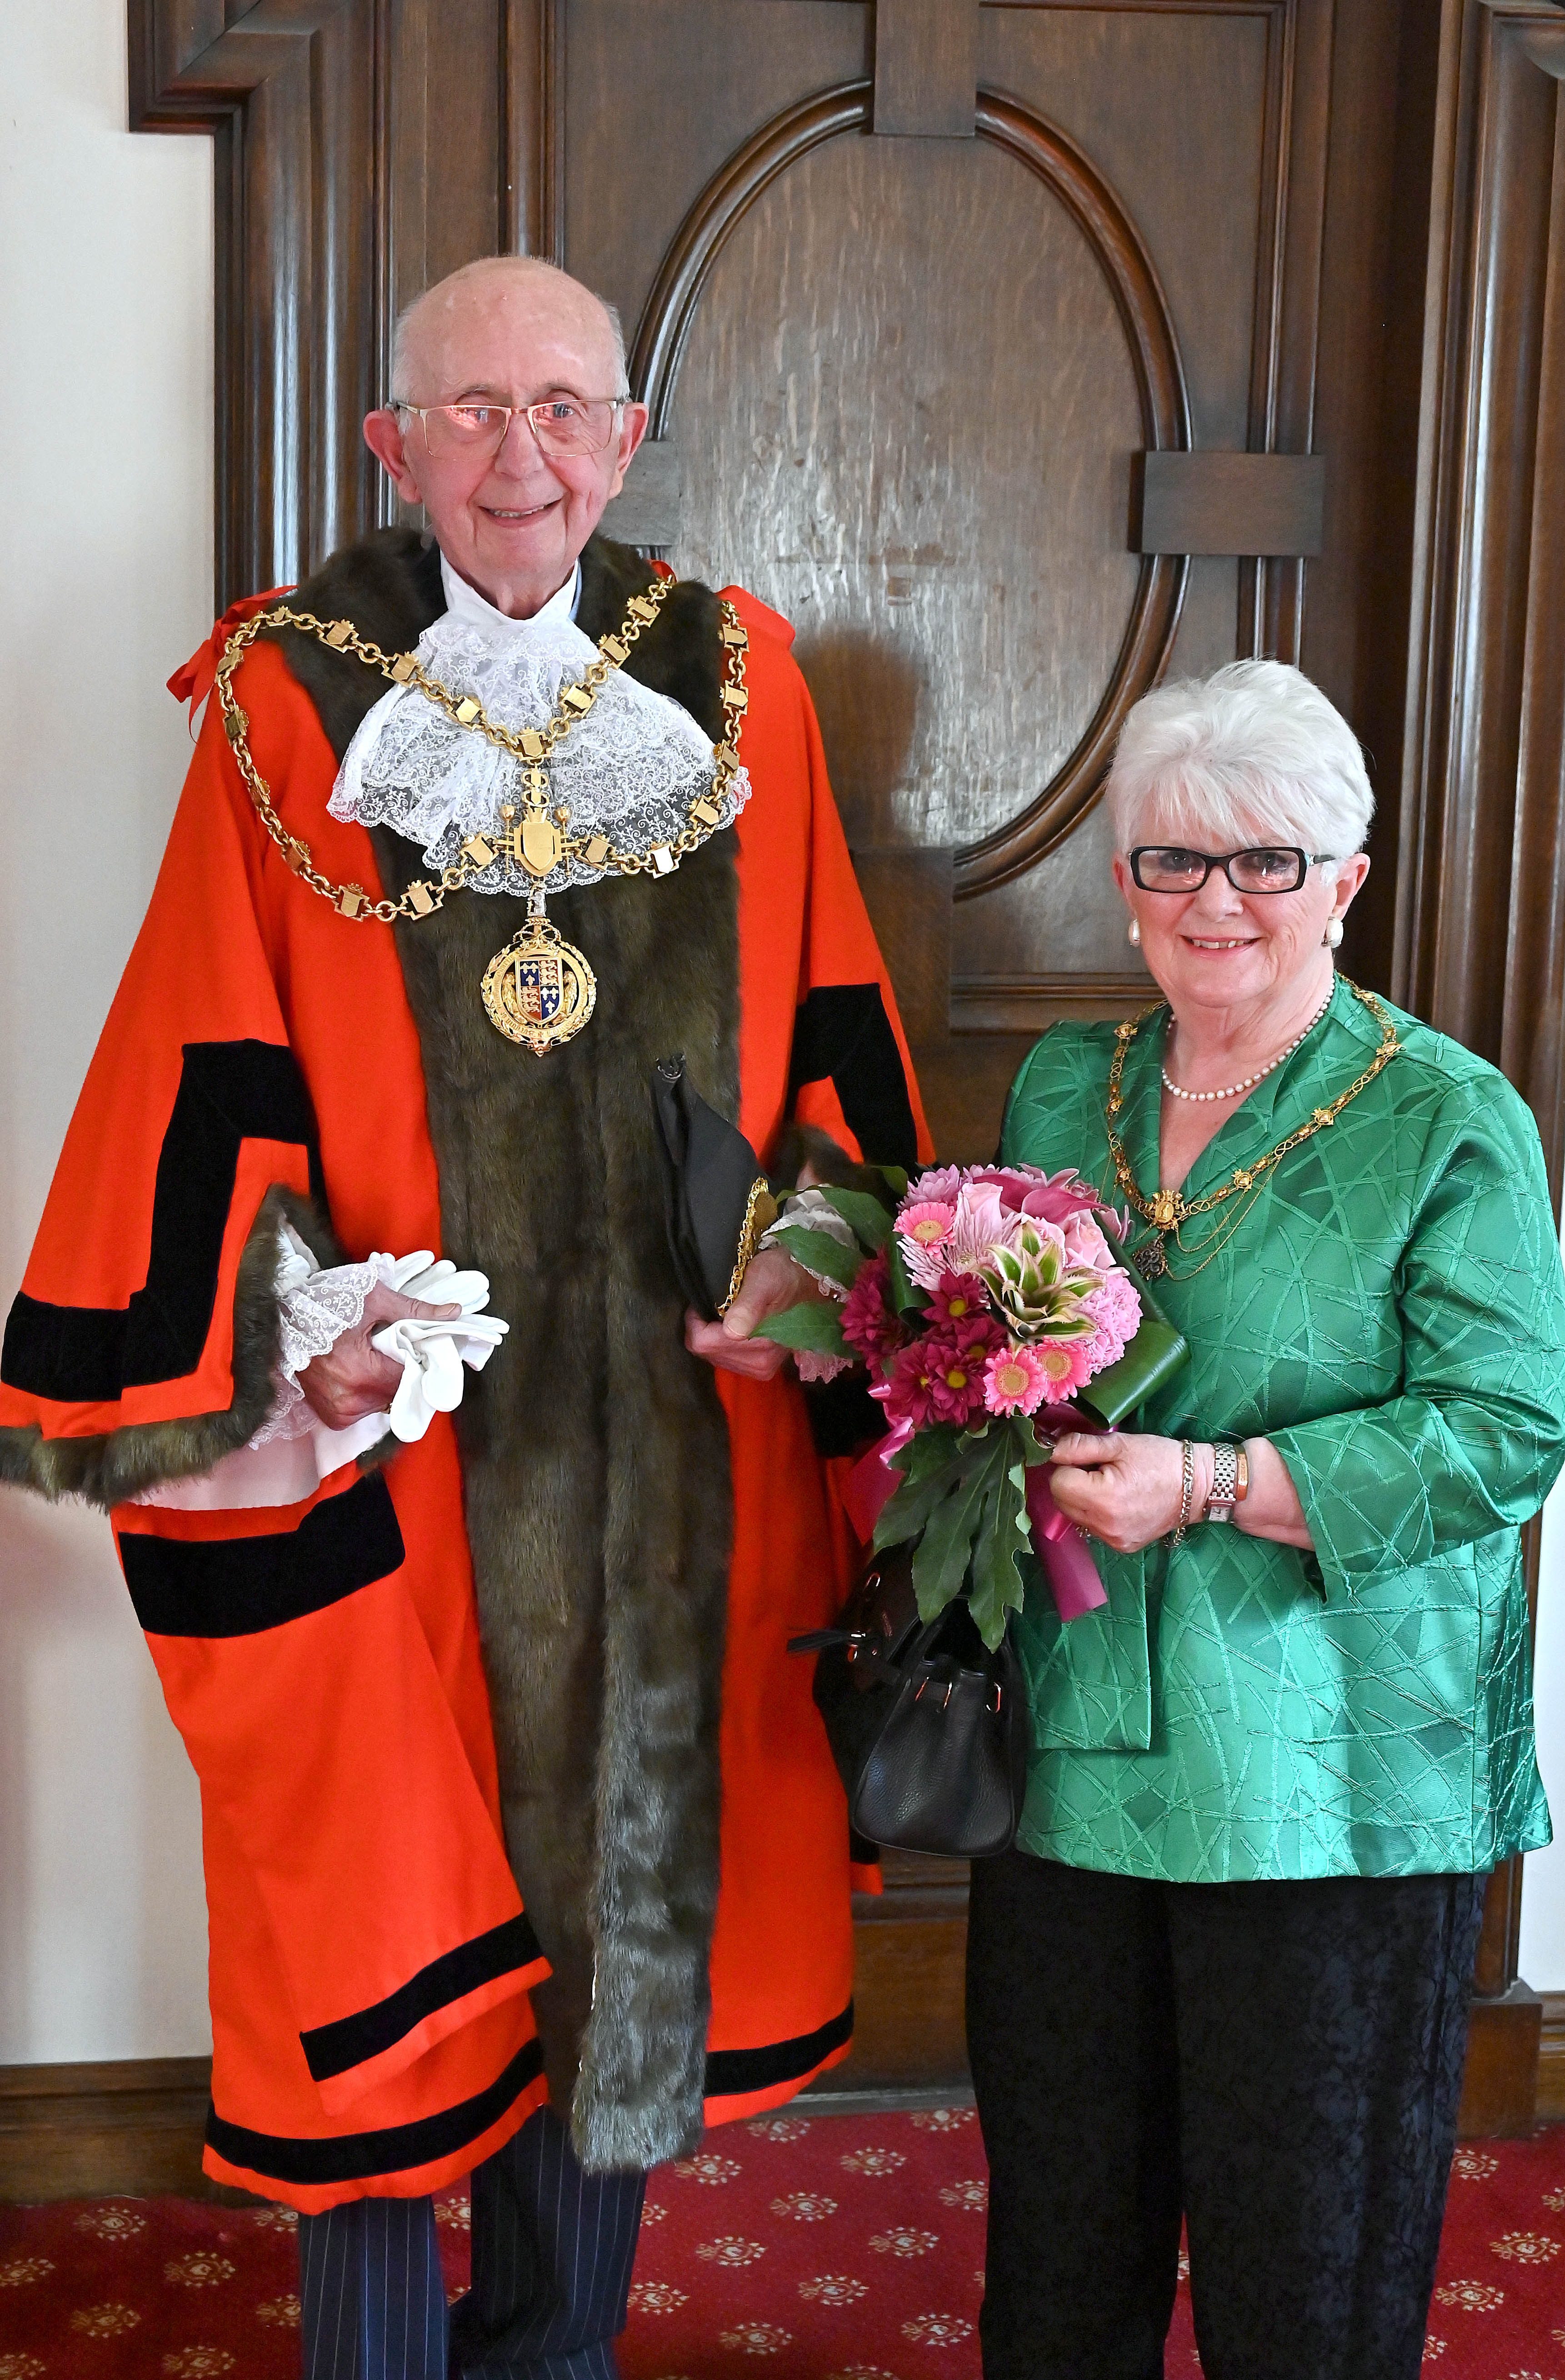 Mayor and Mayoress of Walsall, Anthony and Christina Harris, wearing mayoral chains of office